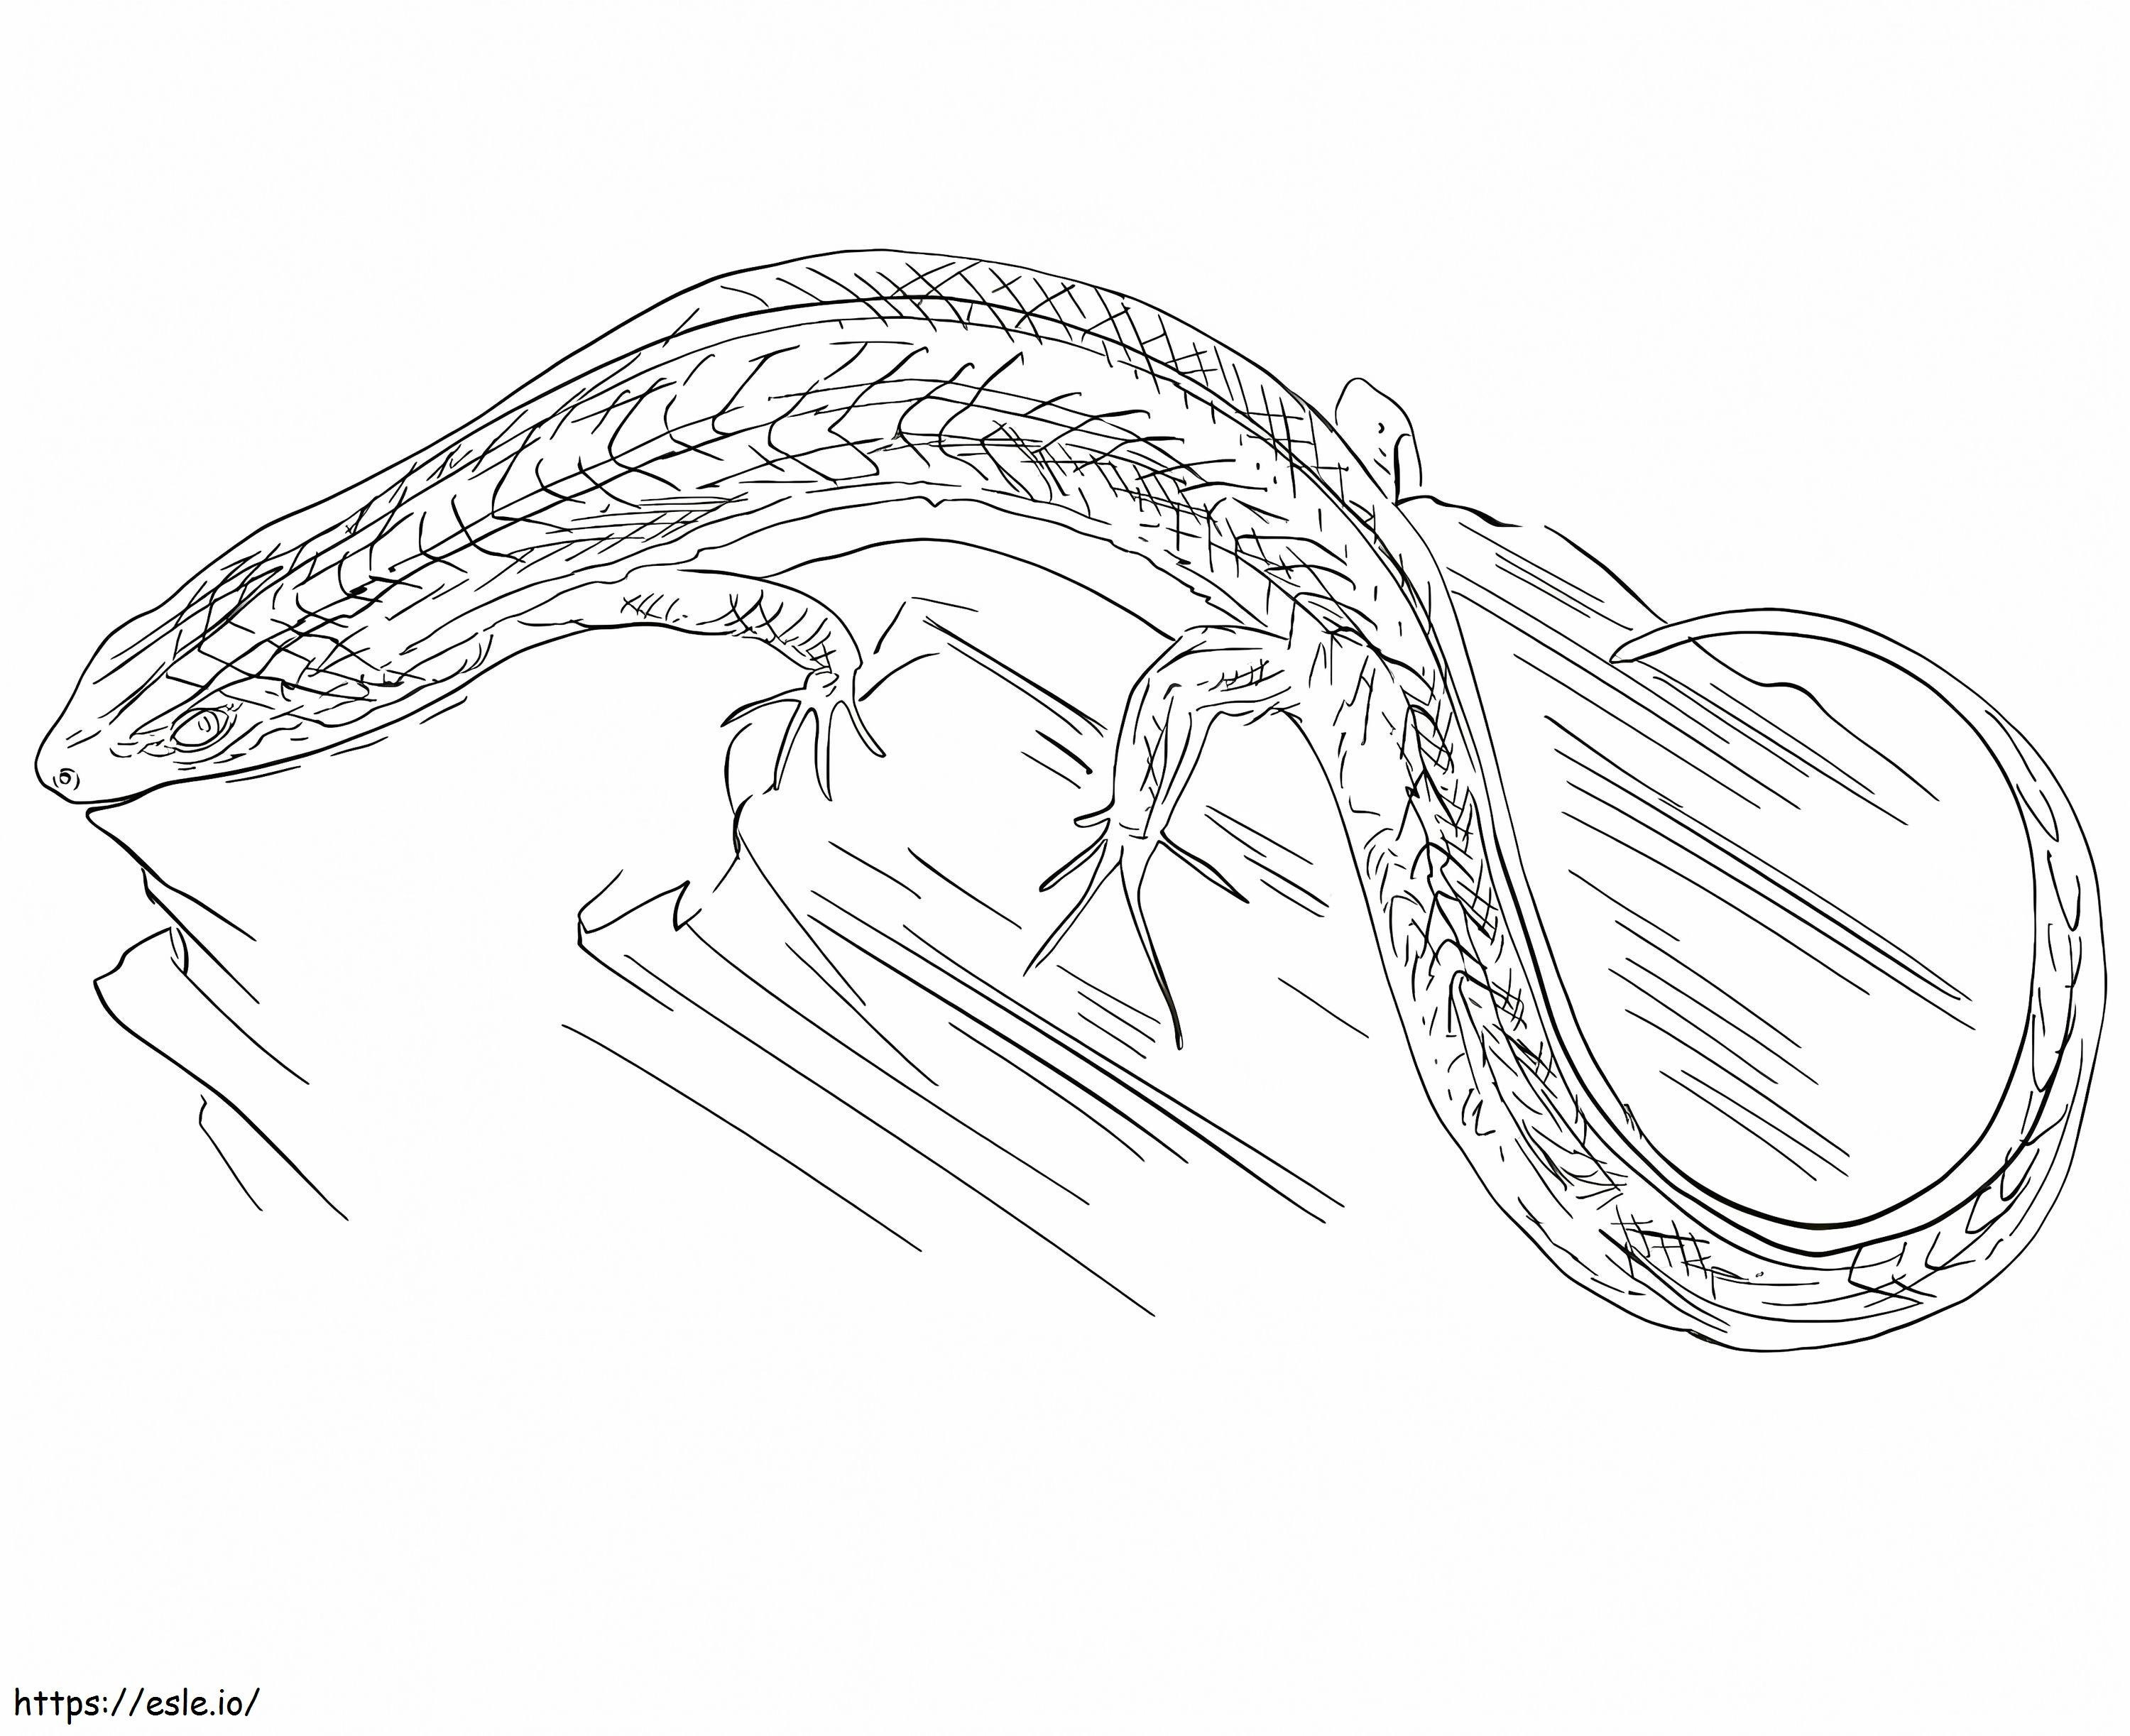 Chevron Skink coloring page